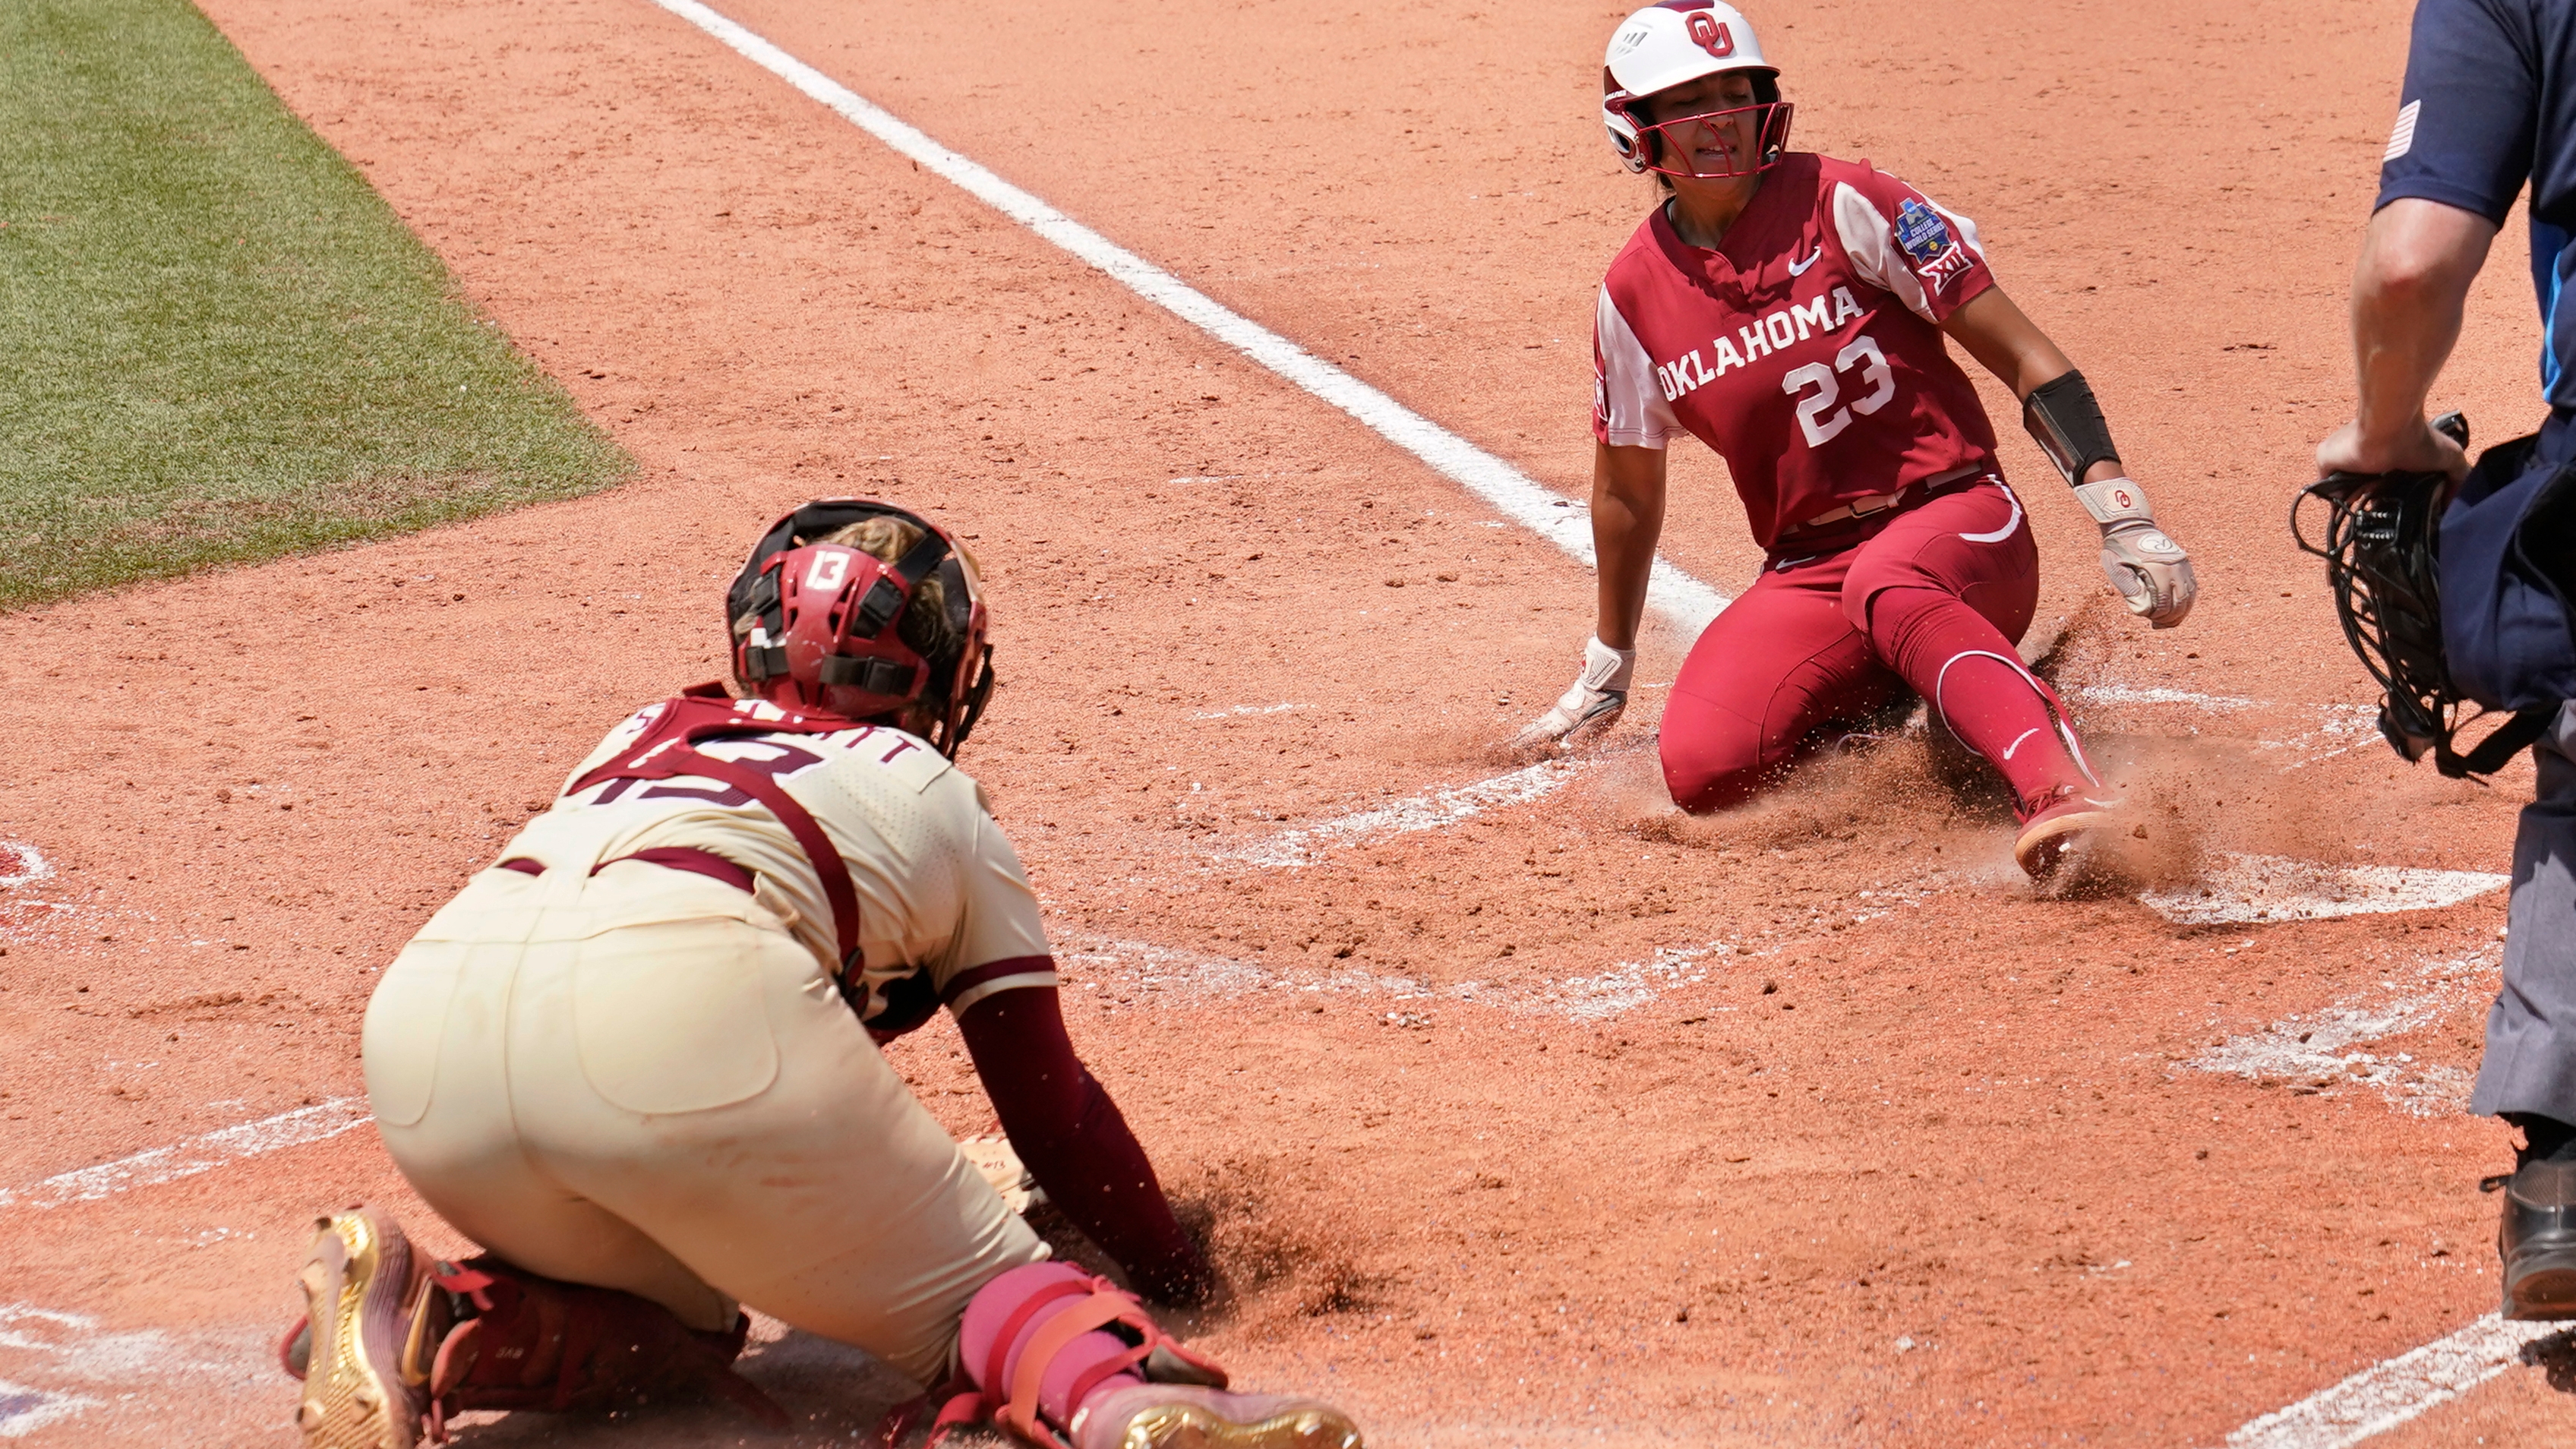 WCWS: Should players wear shorts at the softball World Series?